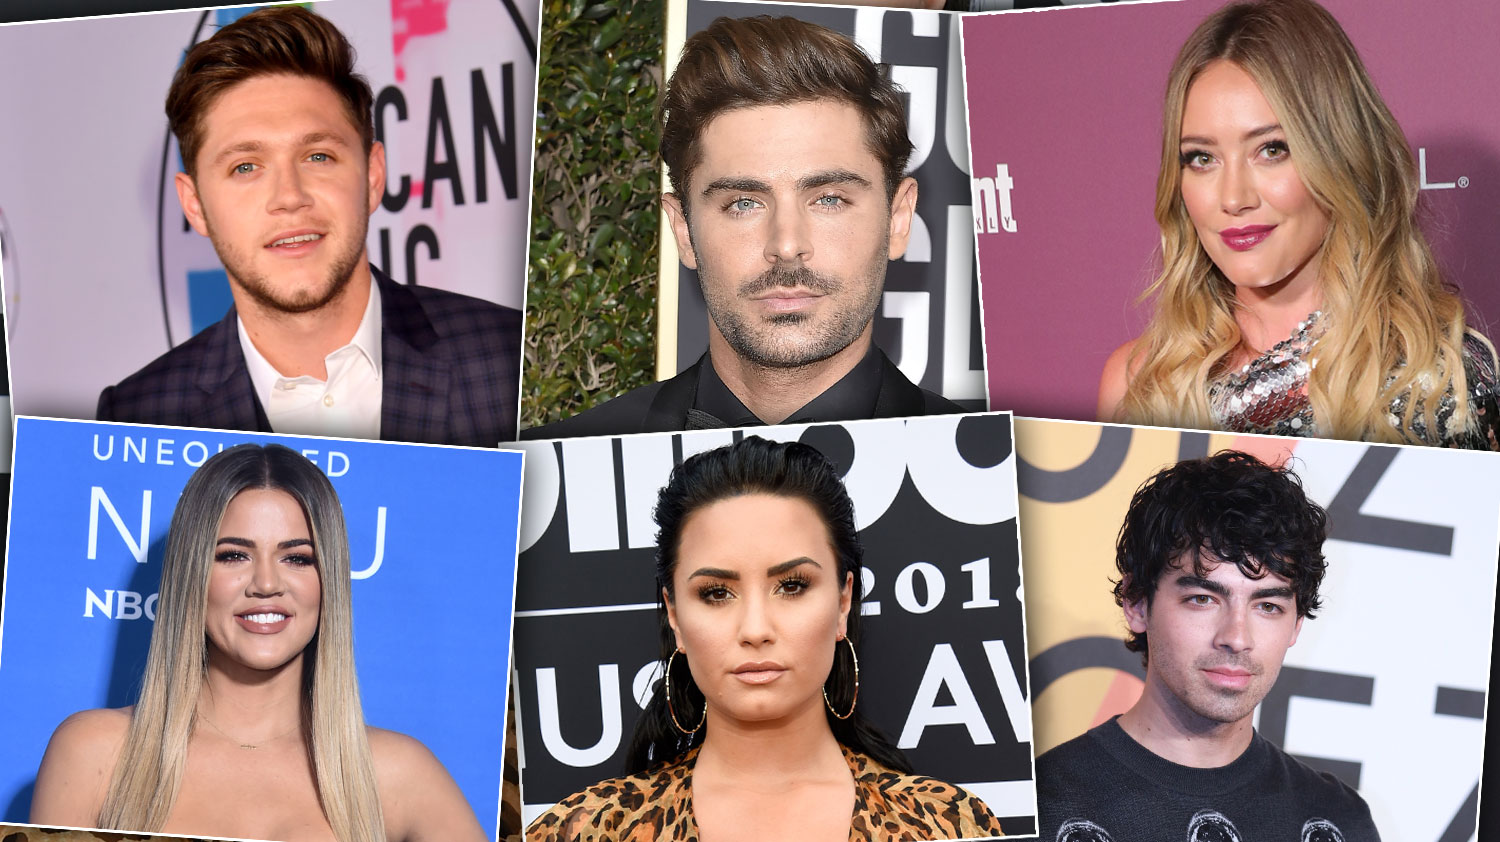 Celebrity whos dating who 2015